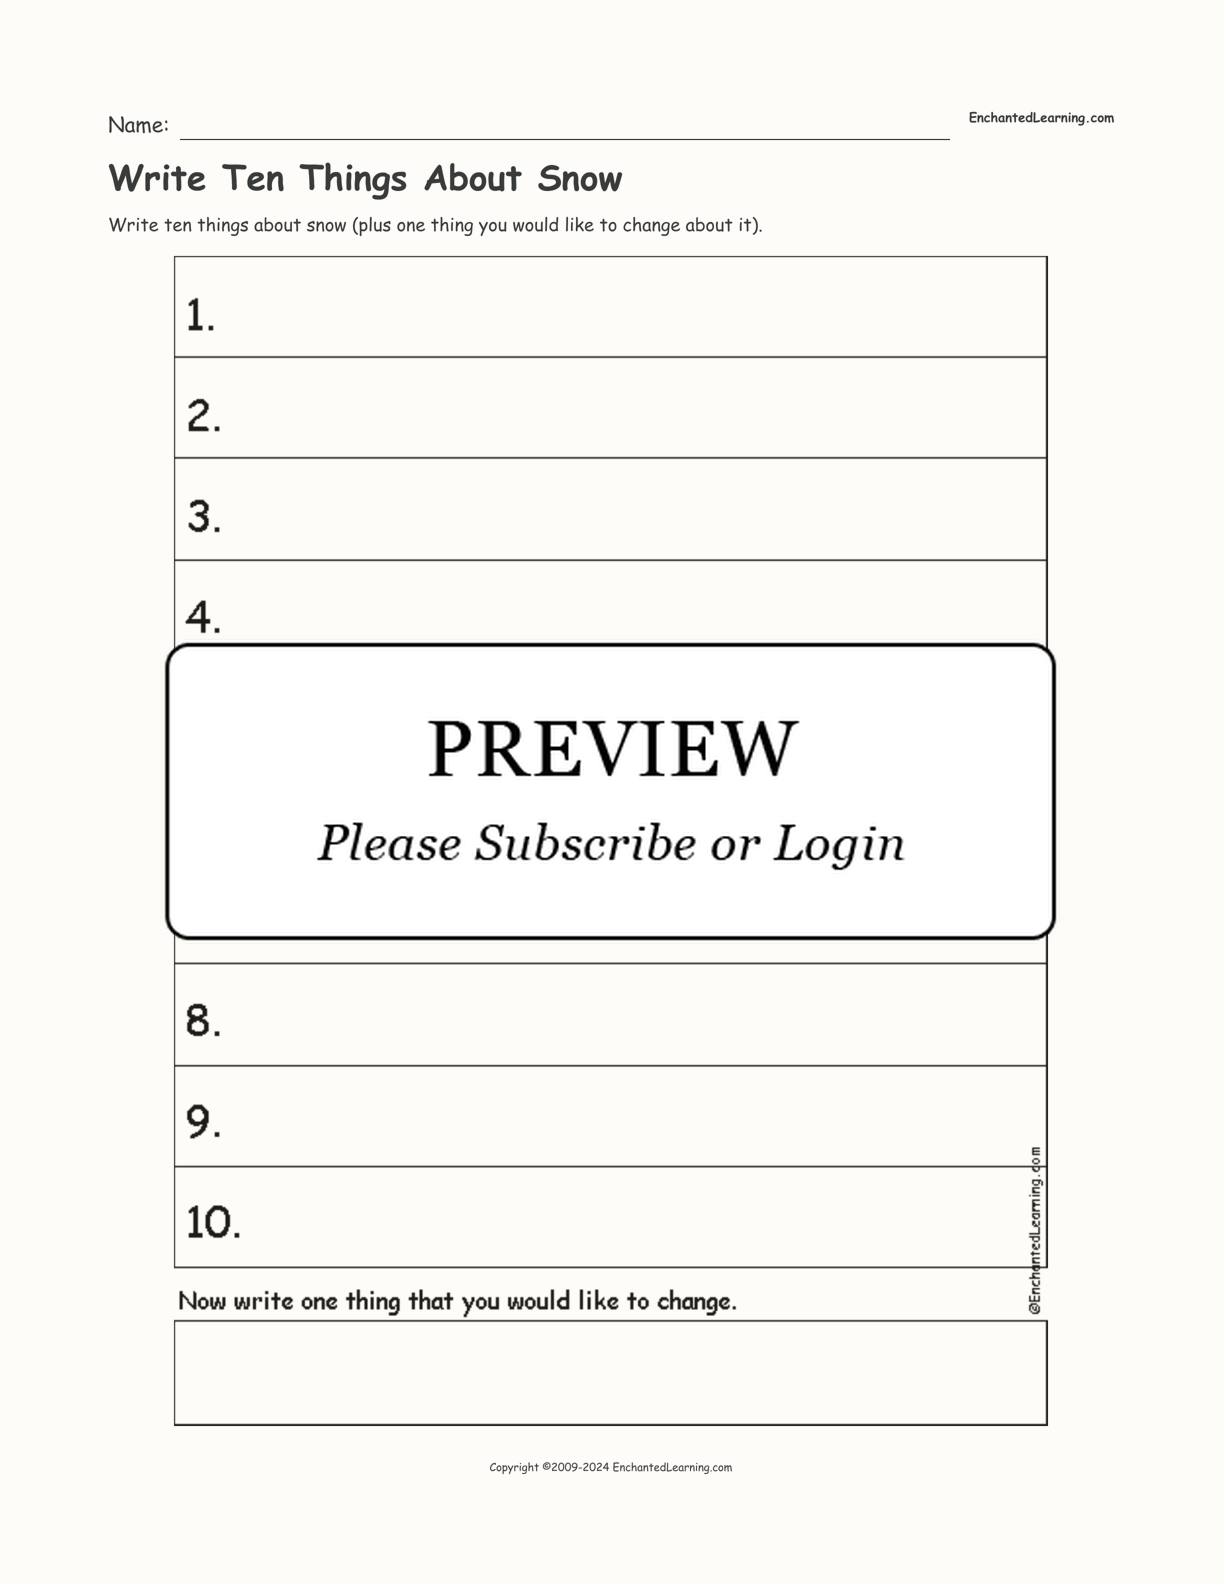 Write Ten Things About Snow interactive worksheet page 1